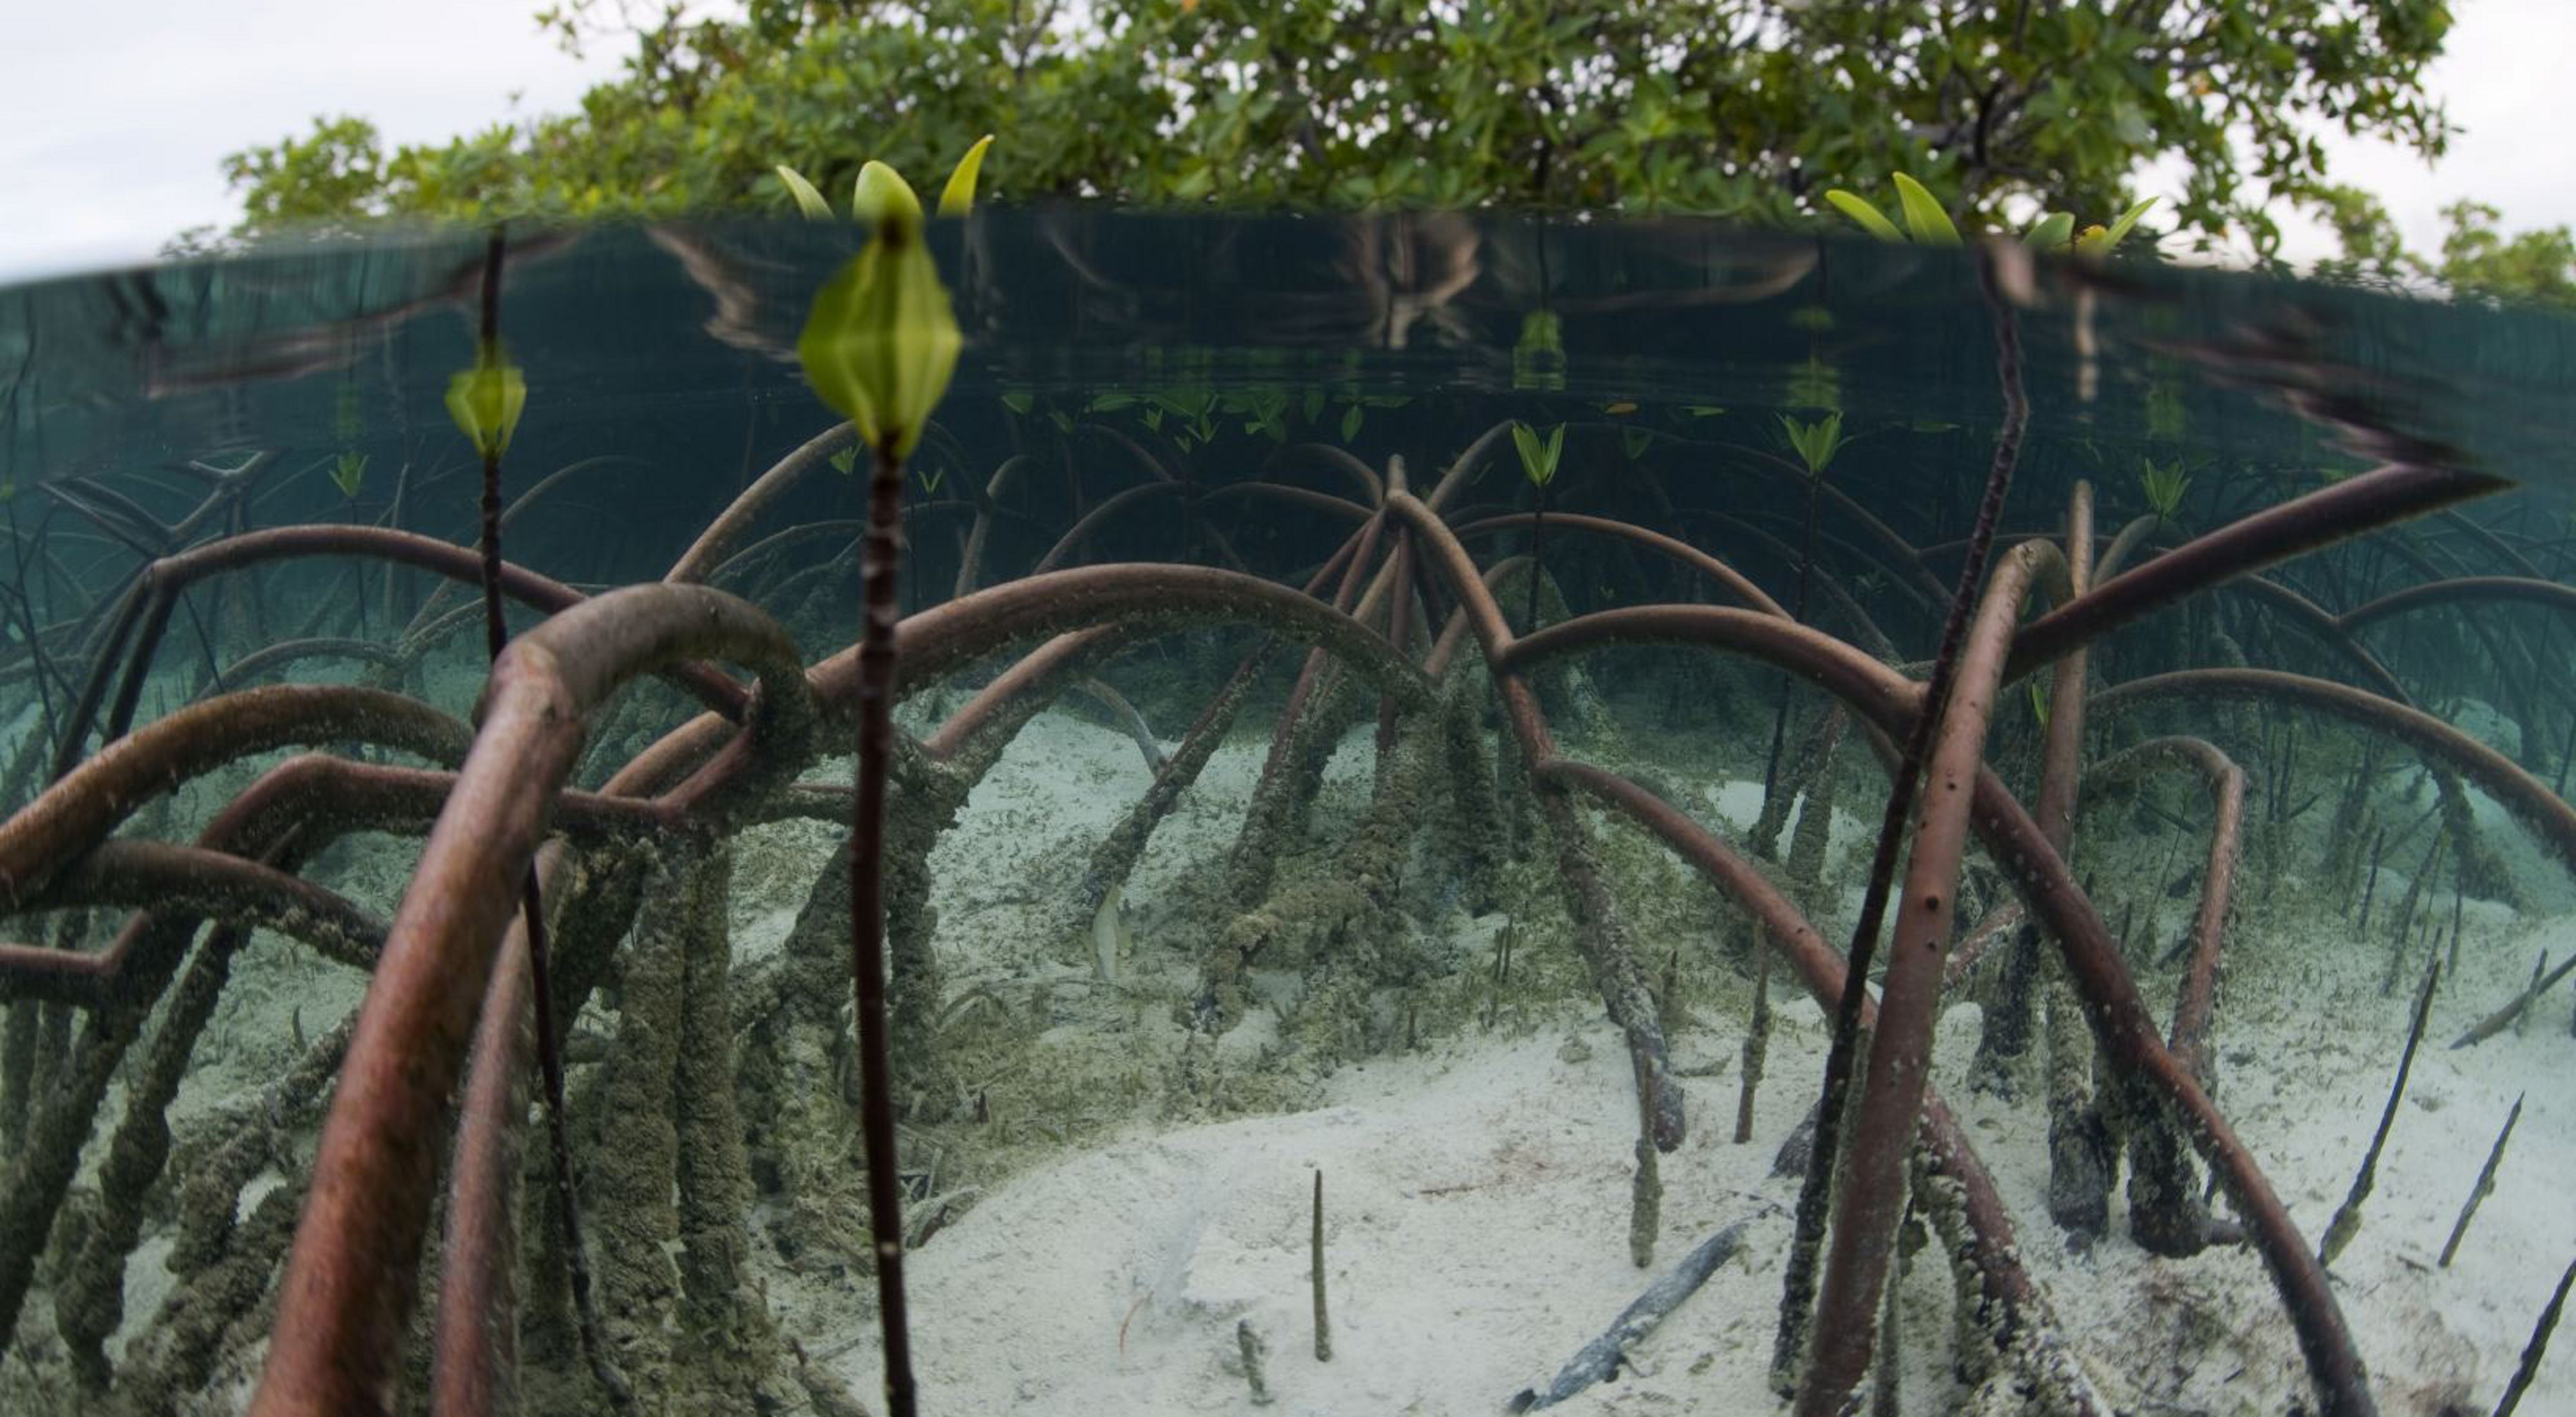  mangrove roots above and under the water